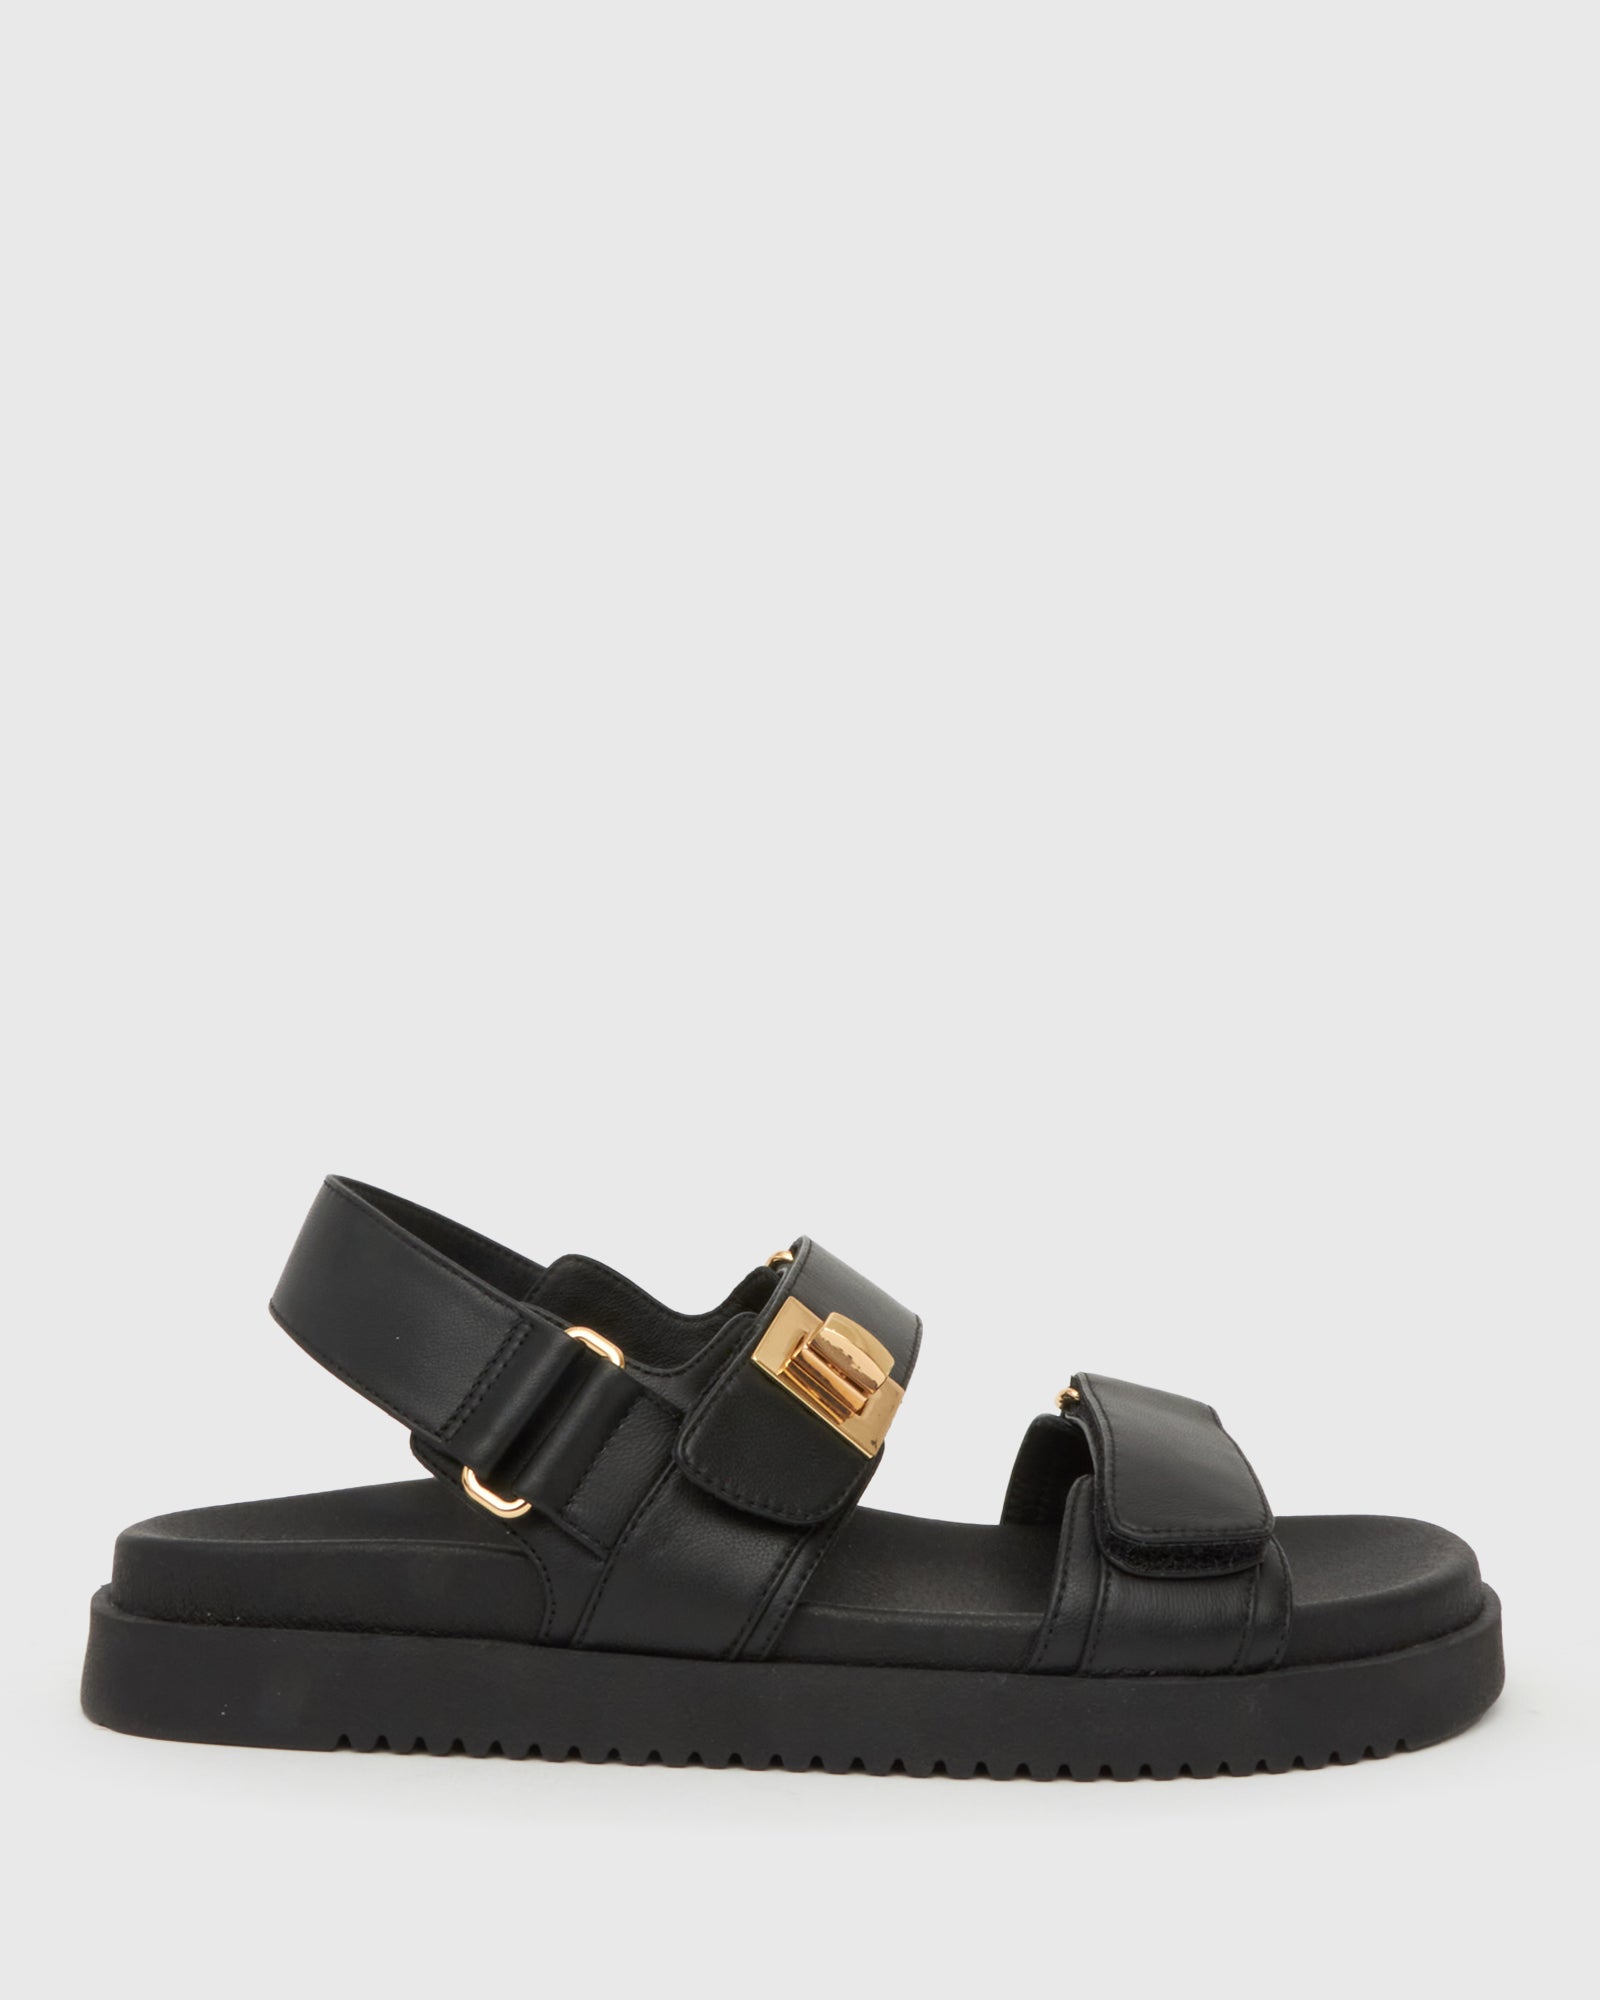 Buy MALINI Buckle Footbed Sandals by Betts online - Betts